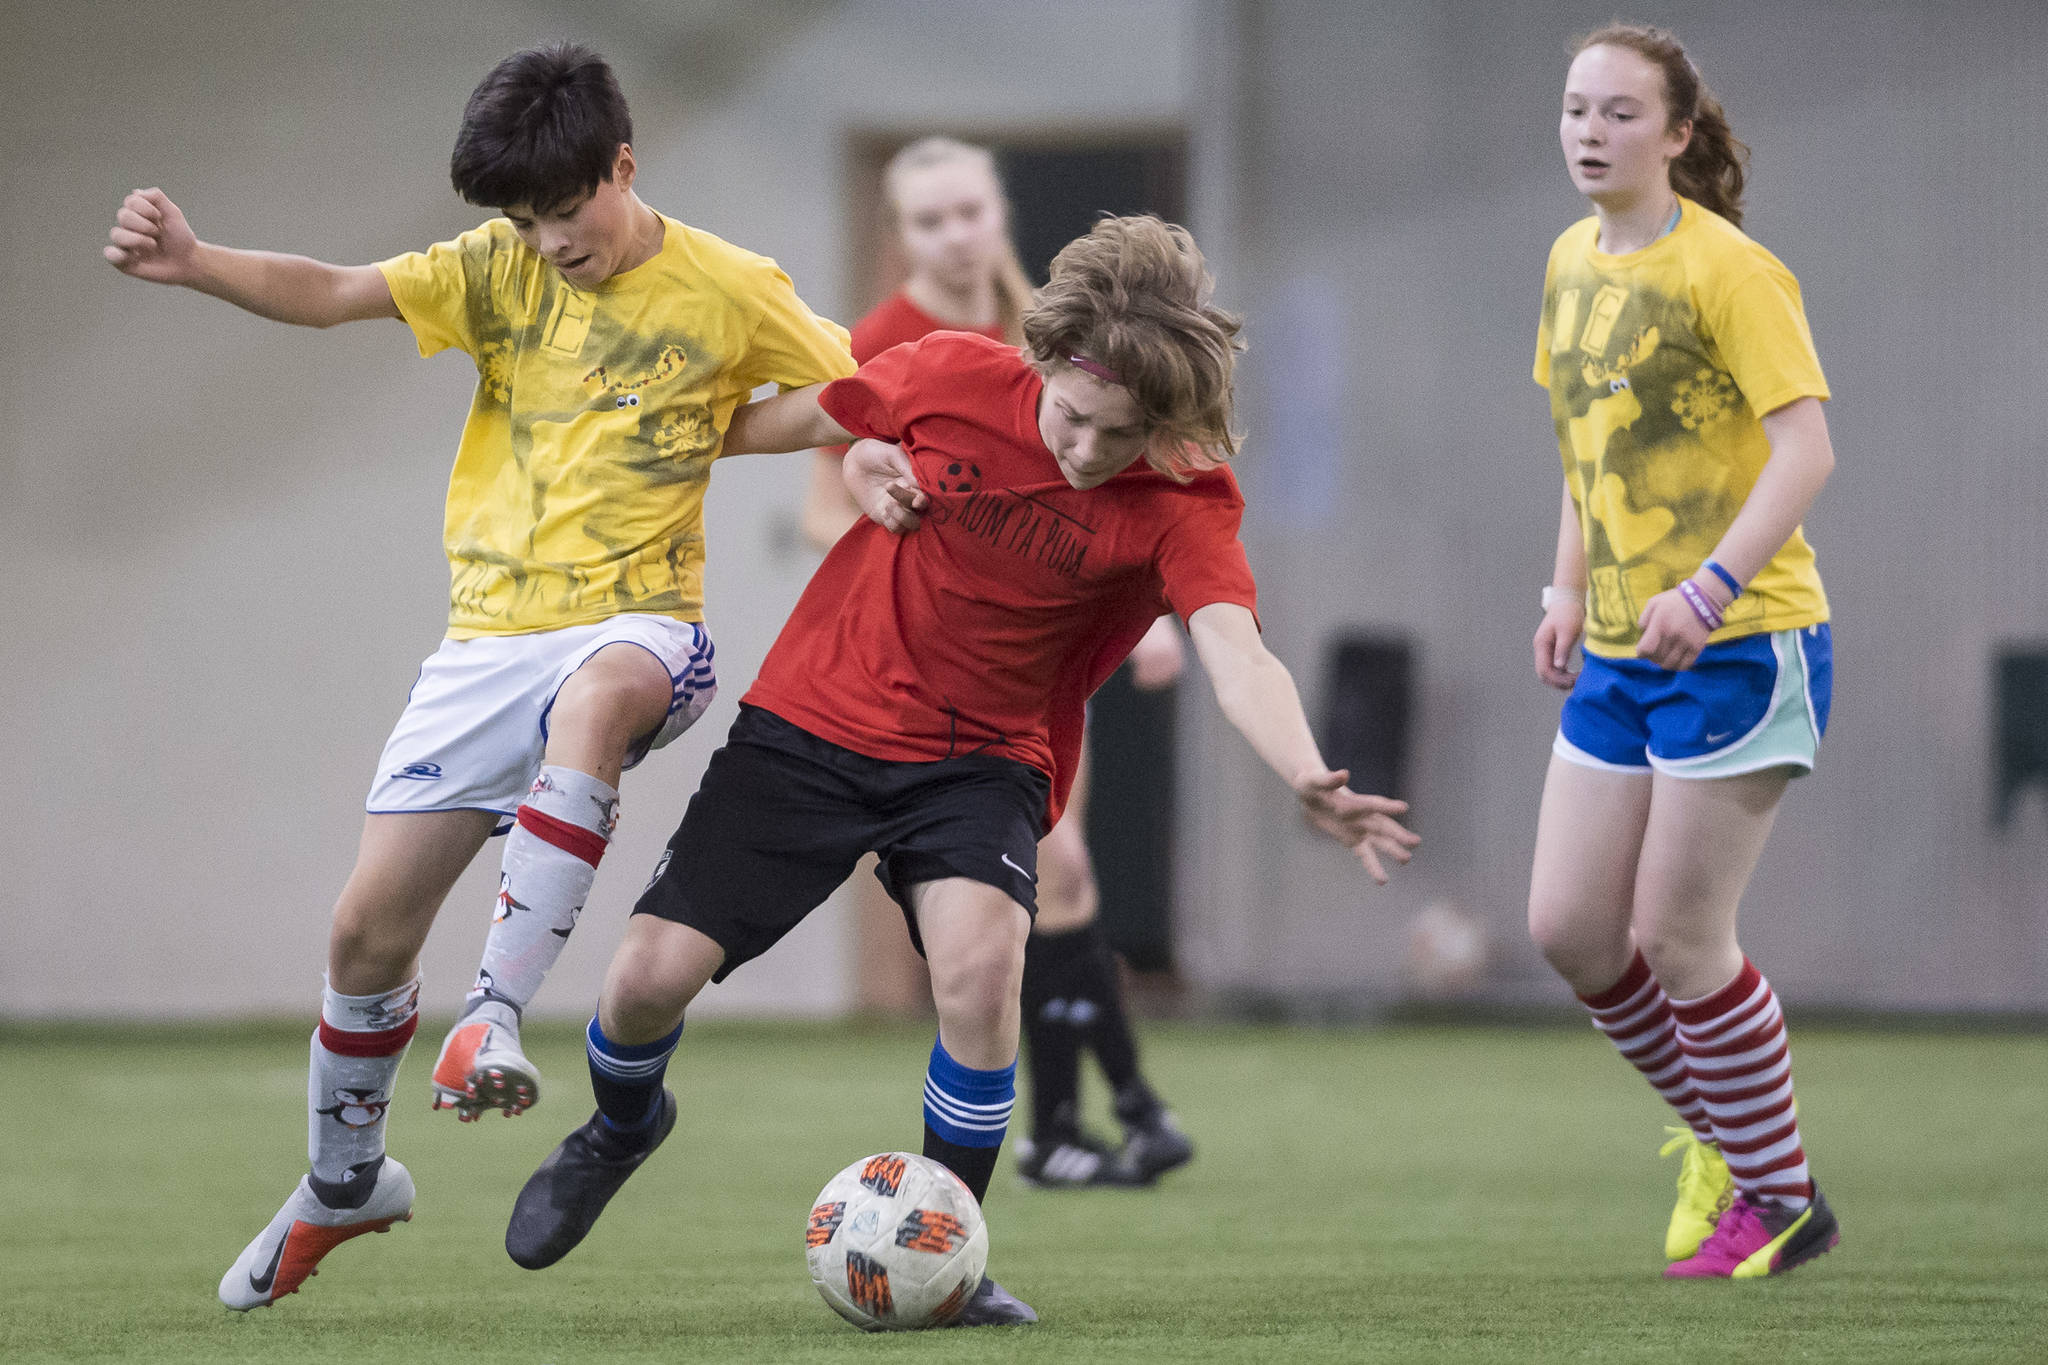 IceKickles play against the Rum Pa Pum at the annual Holiday Cup Soccer Tournament at the Wells Fargo Dimond Park Field House on Wednesday, Dec. 26, 2018. (Michael Penn | Juneau Empire)